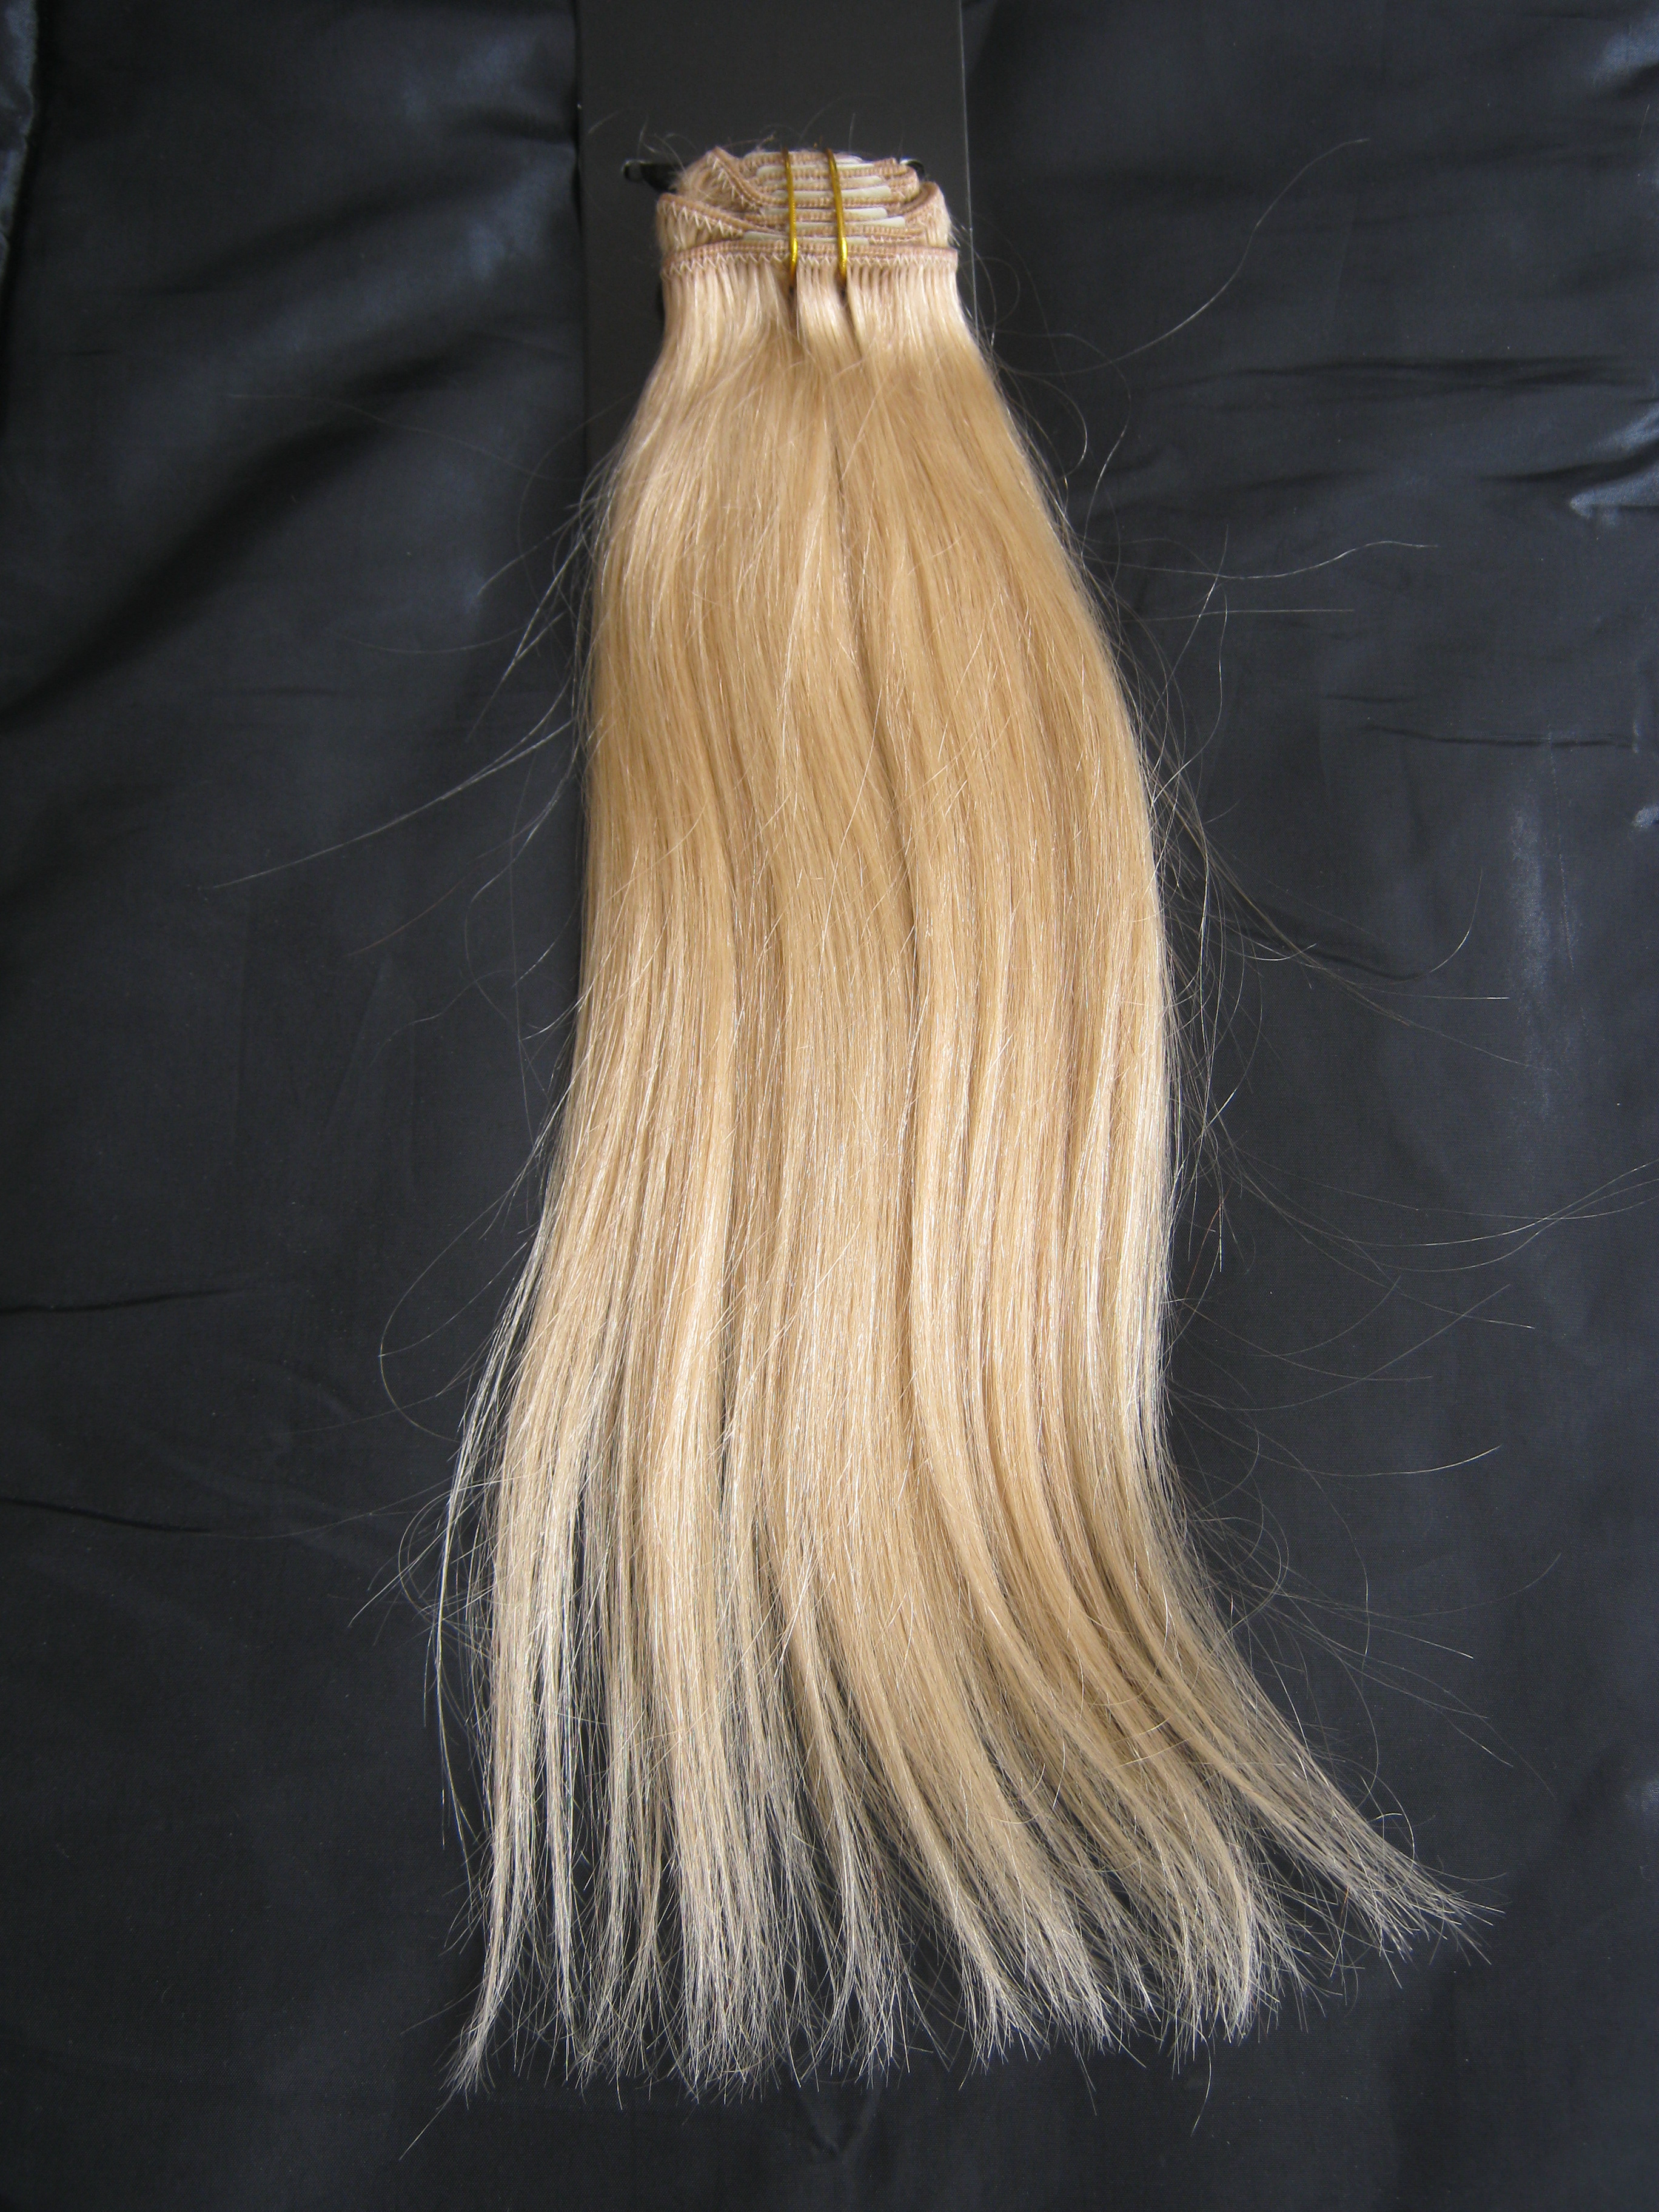 You get 8 pieces of hair: 2 larger clip-ins with 3 clips, 2 medium ...